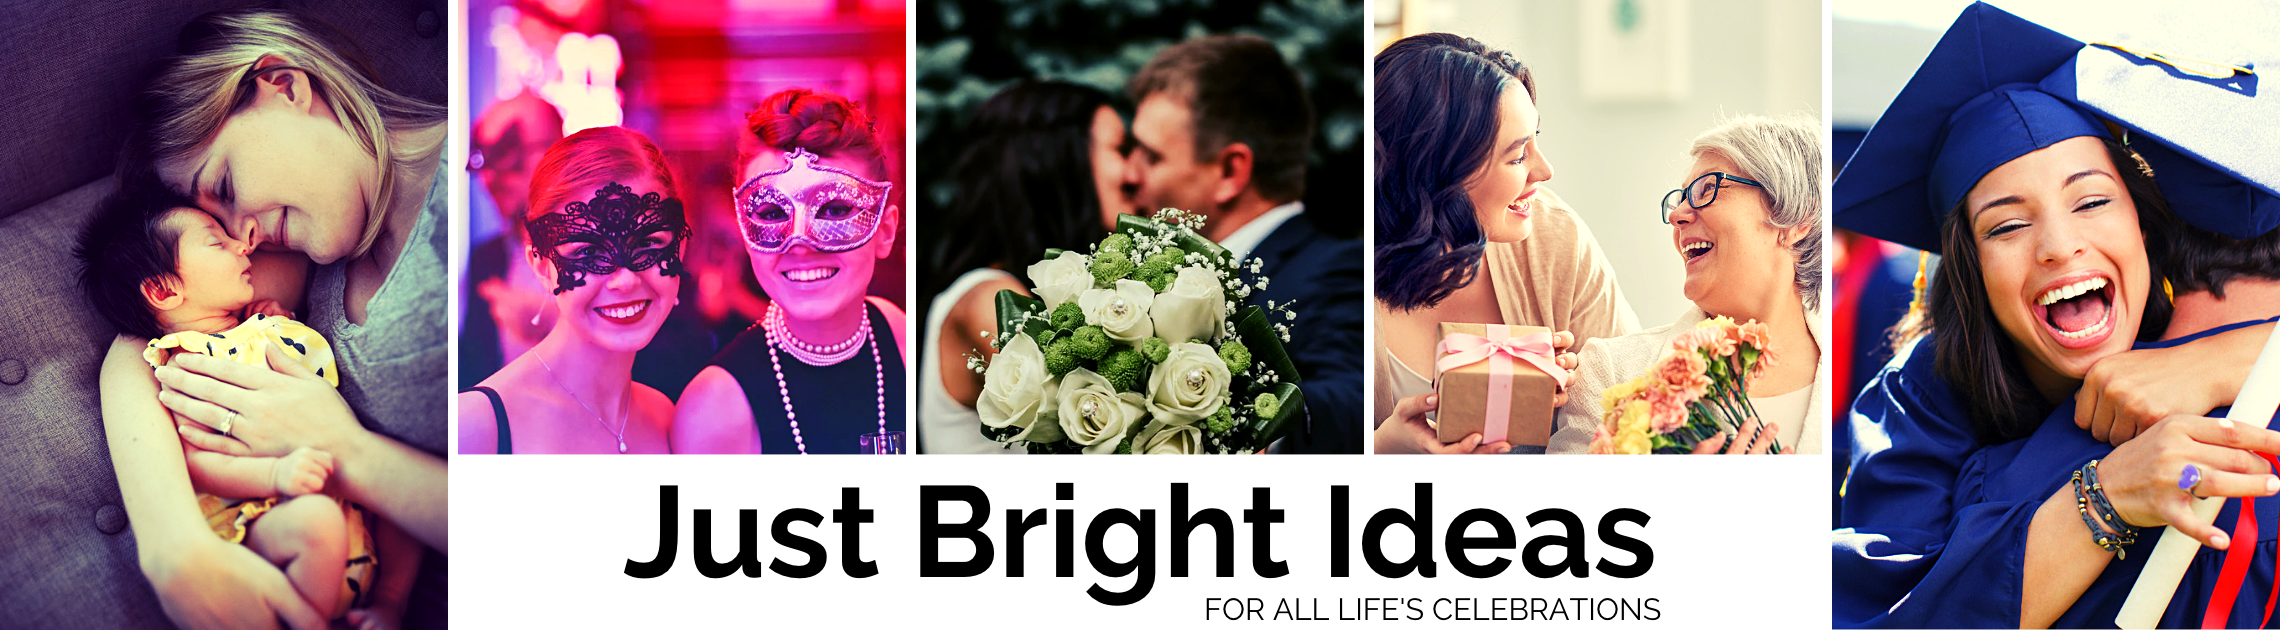 Just Bright Ideas - Images of people celebrating - click here to return to the homepage